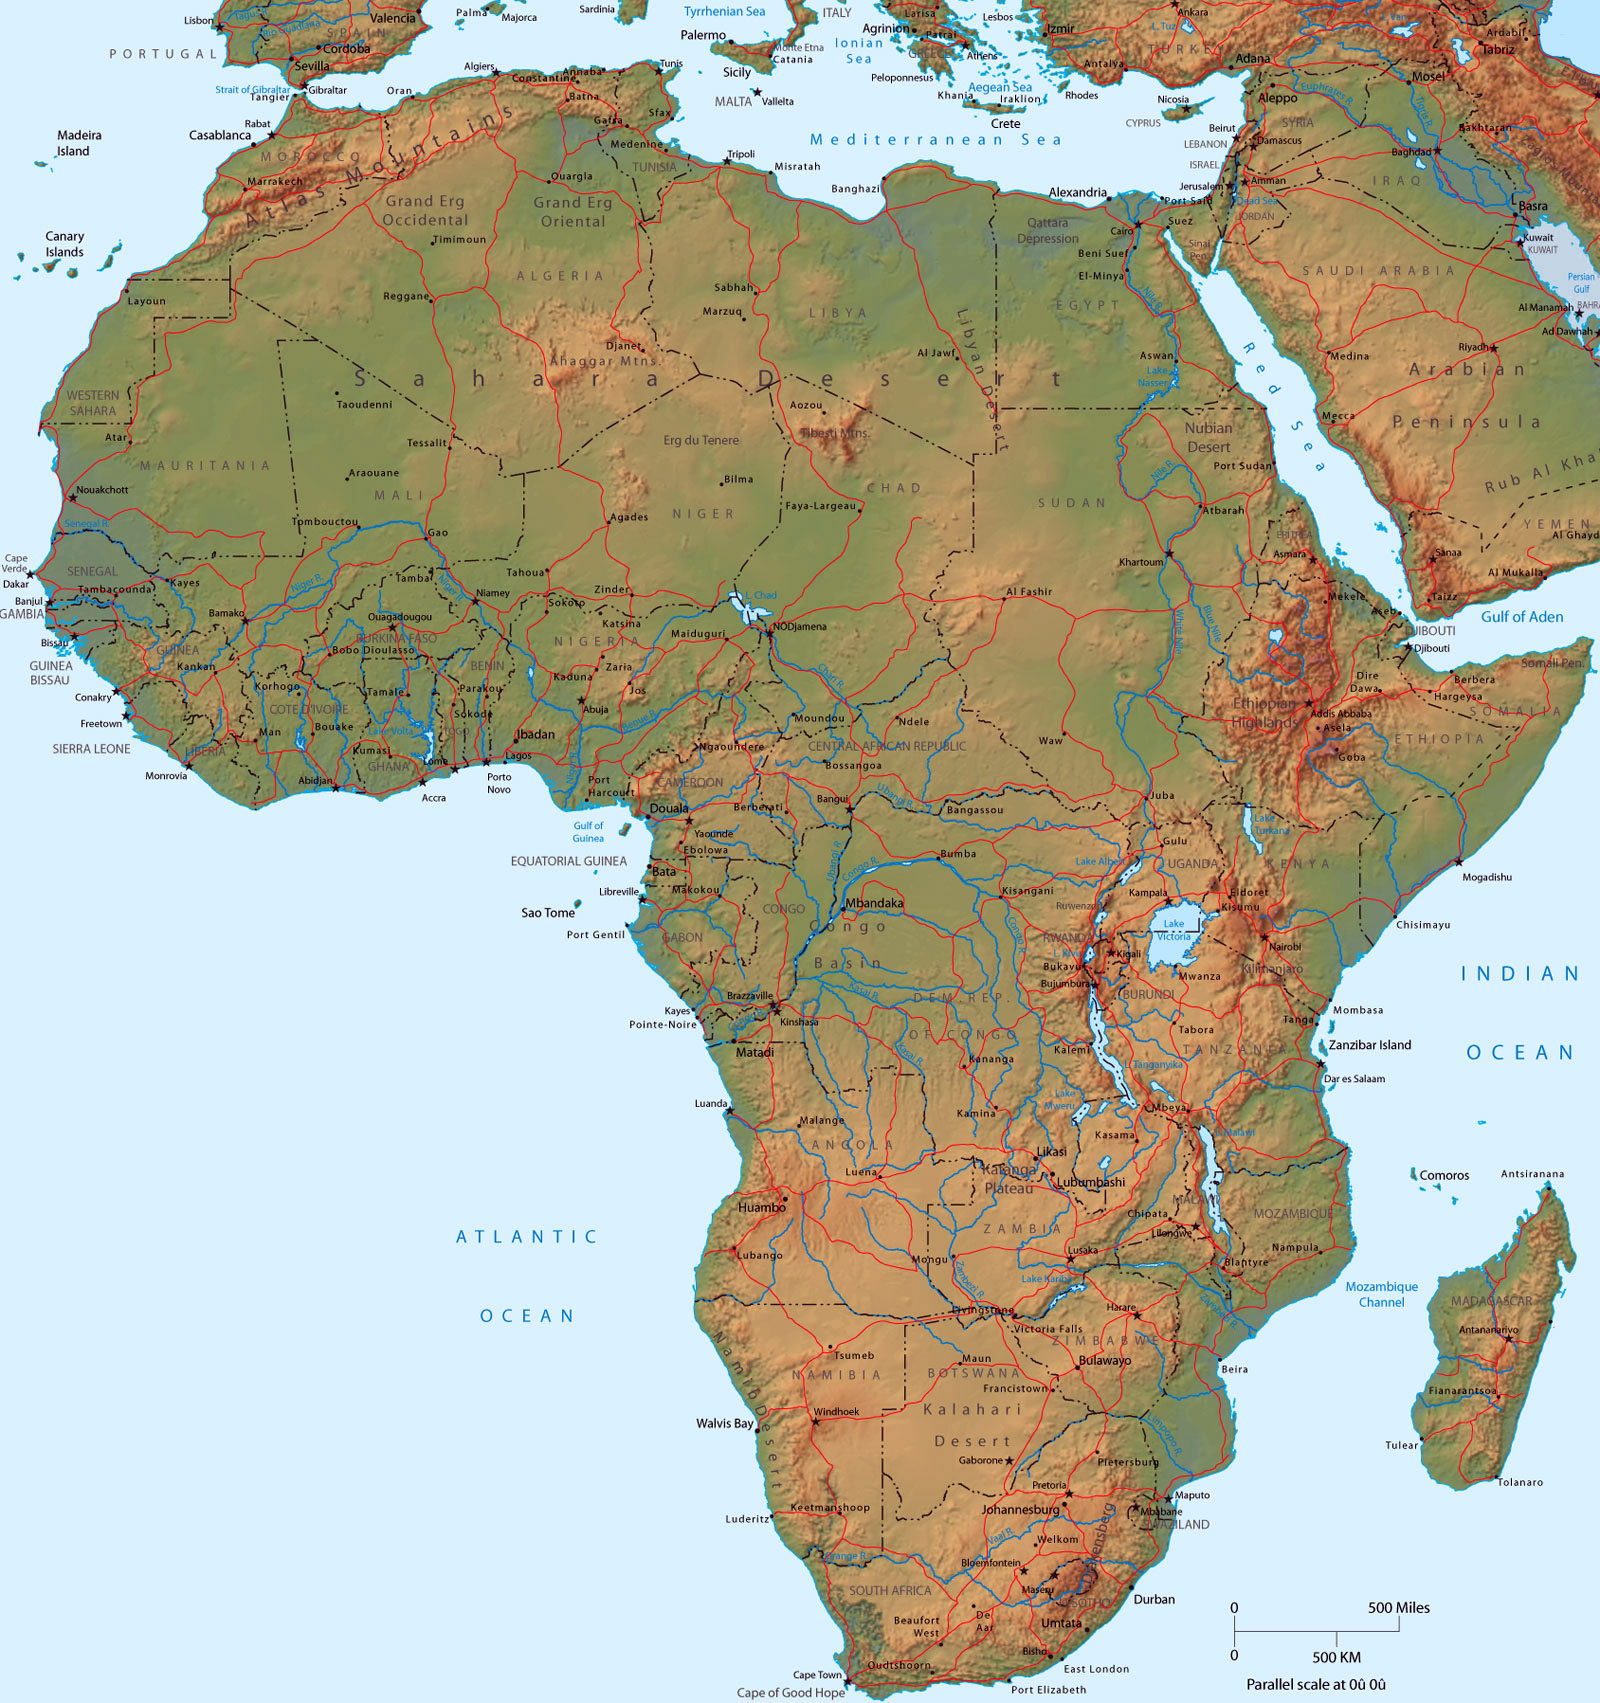 Maps of Africa and African countries Political maps, Administrative